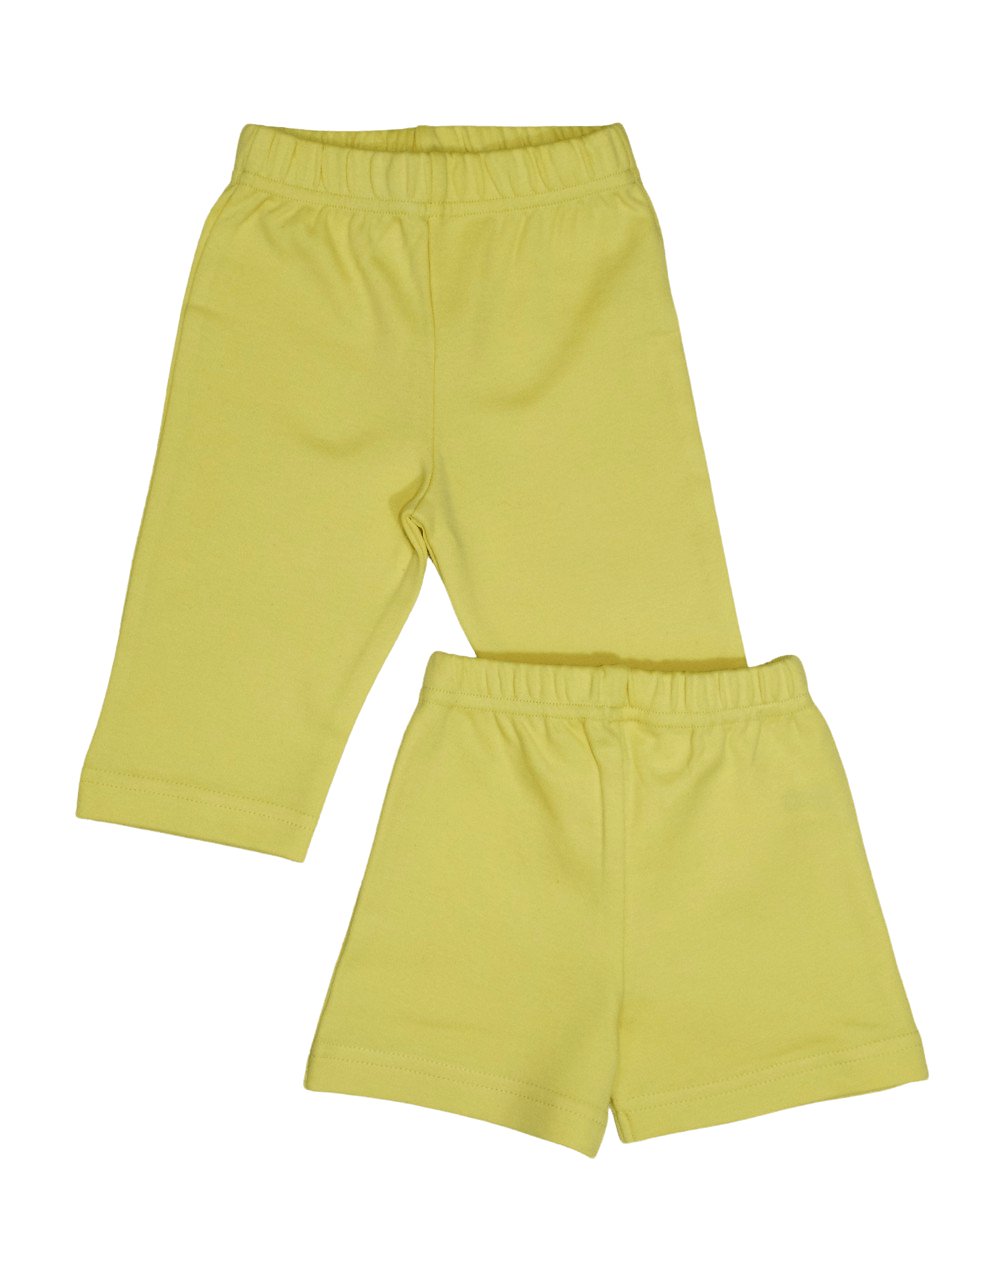 pull on pants & shorts- available in 4 colors by passion lilie